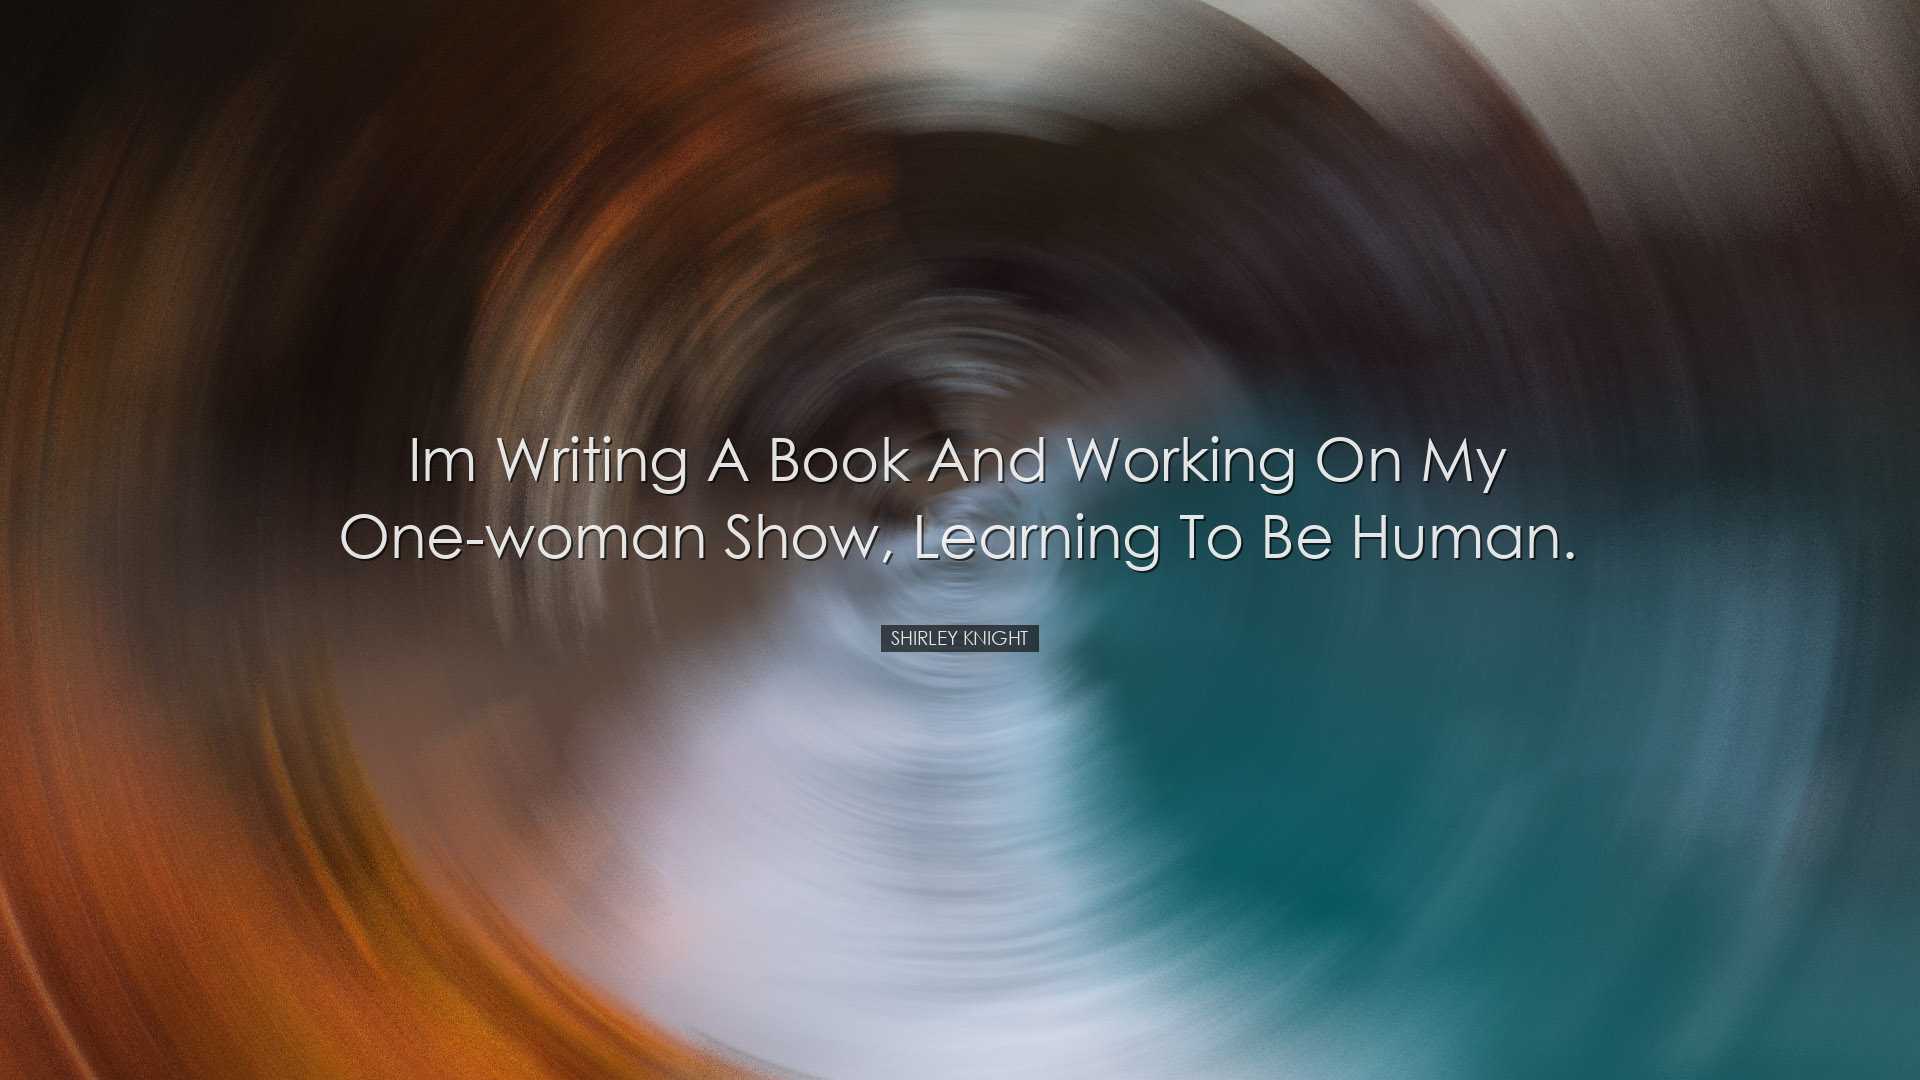 Im writing a book and working on my one-woman show, Learning To Be